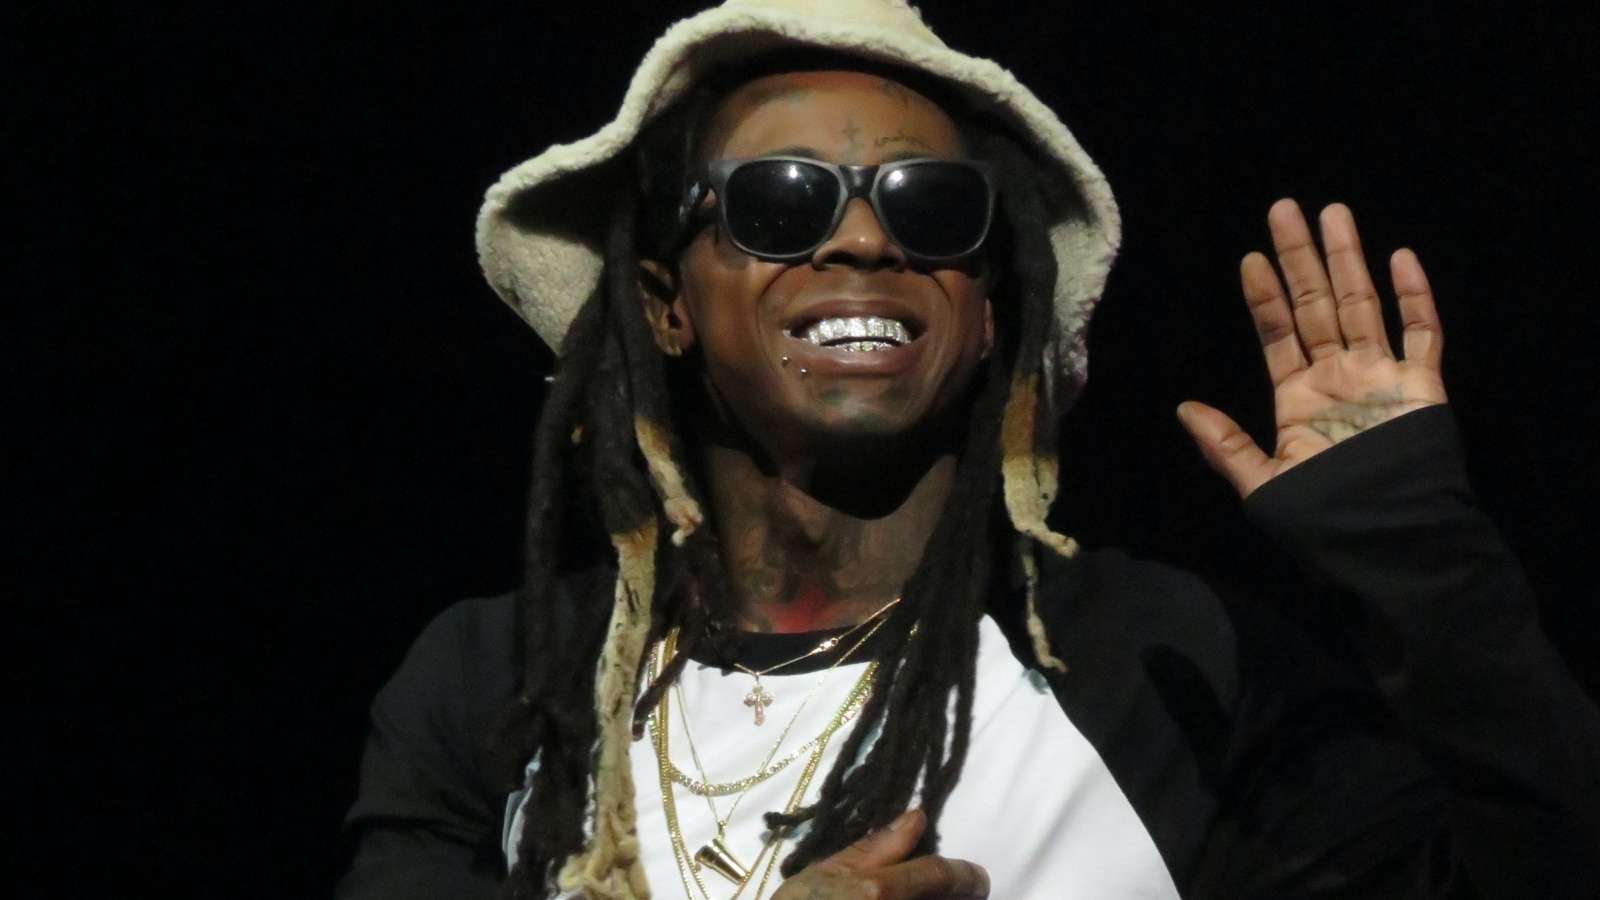 Lil Wayne smiling and waving while performing onstage at a concert.